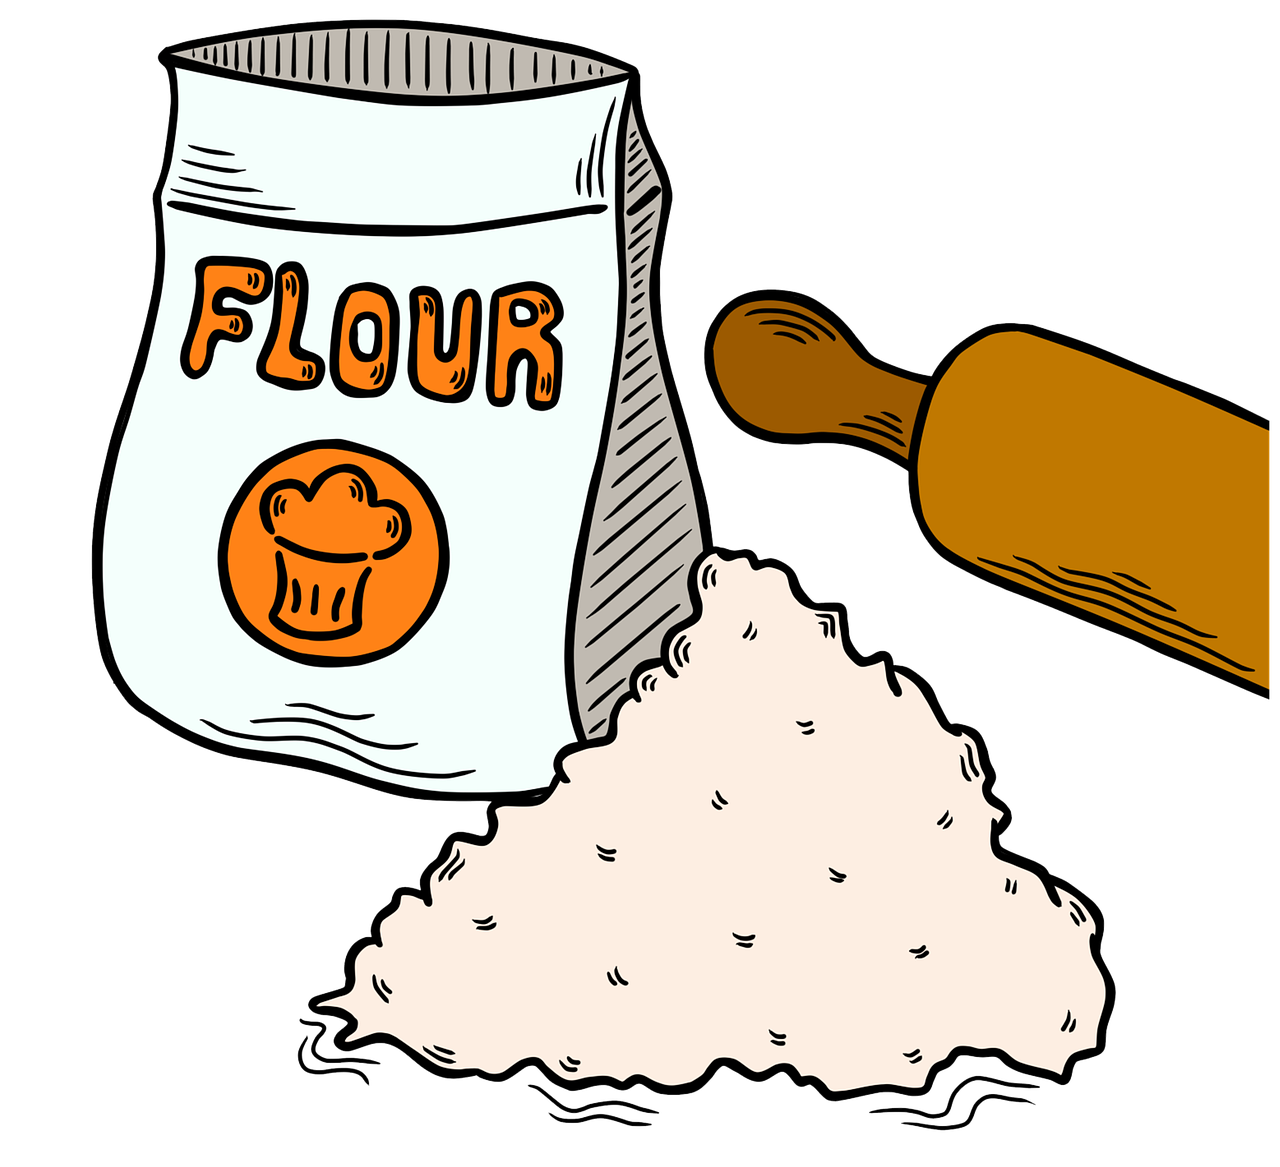 a bag of flour next to a rolling pin, an illustration of, folk art, high contrast illustration, clip-art, wikihow illustration, on black background